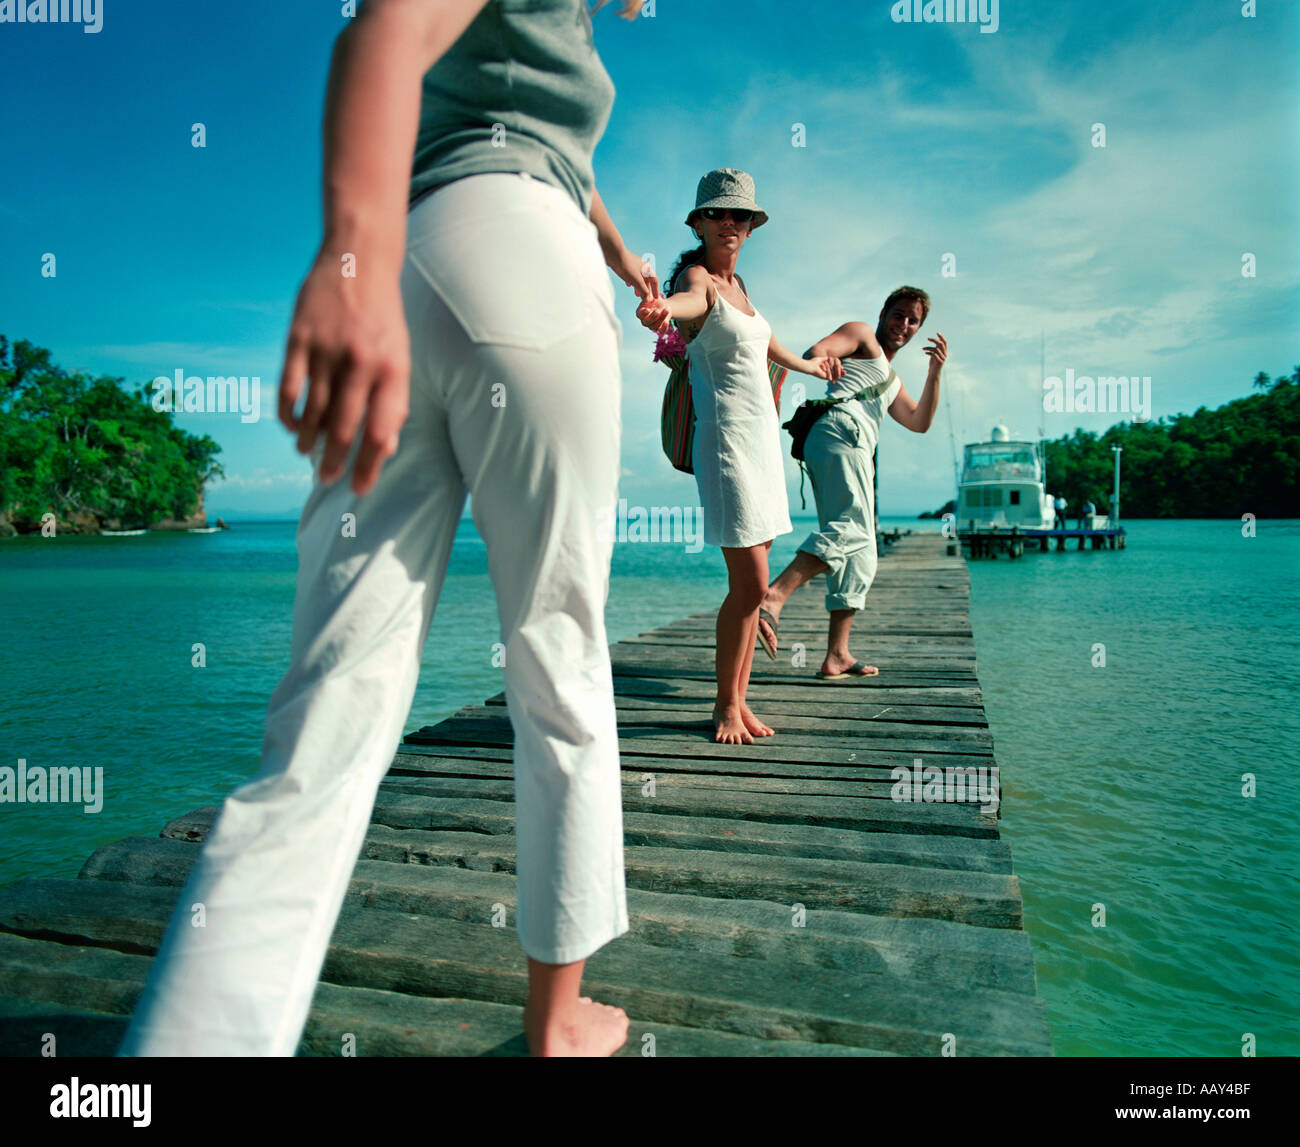 young people on tropical holiday walking on pier to boat Stock Photo